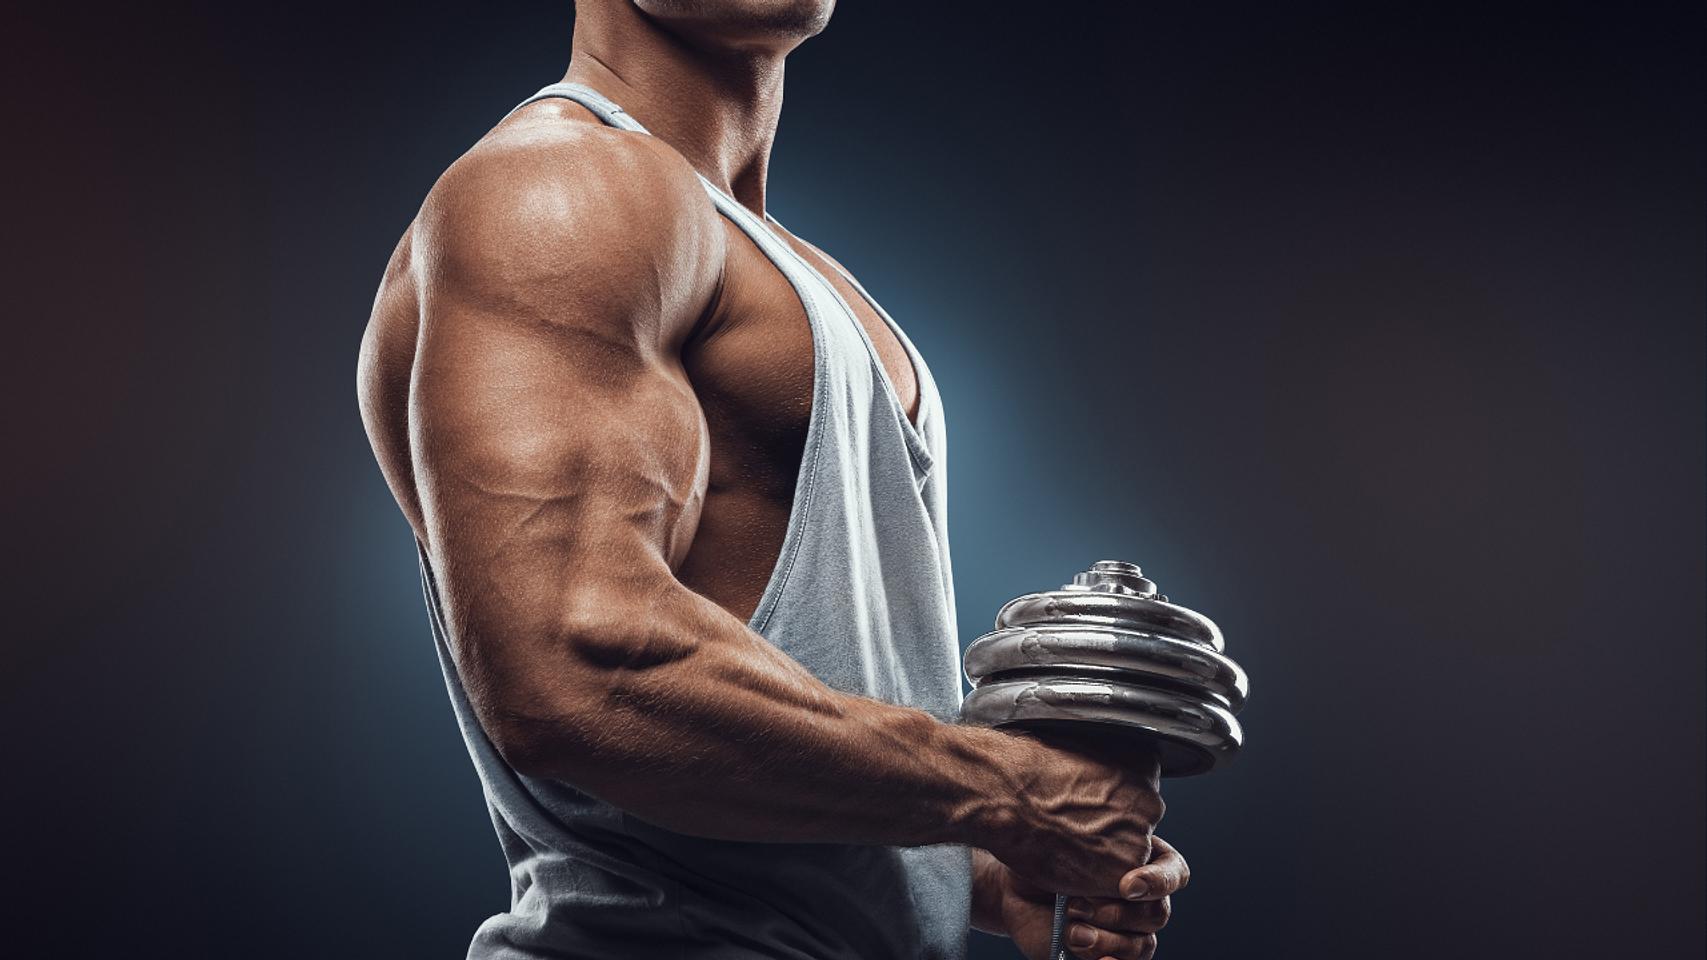 The Best Rep Range To Build Muscle